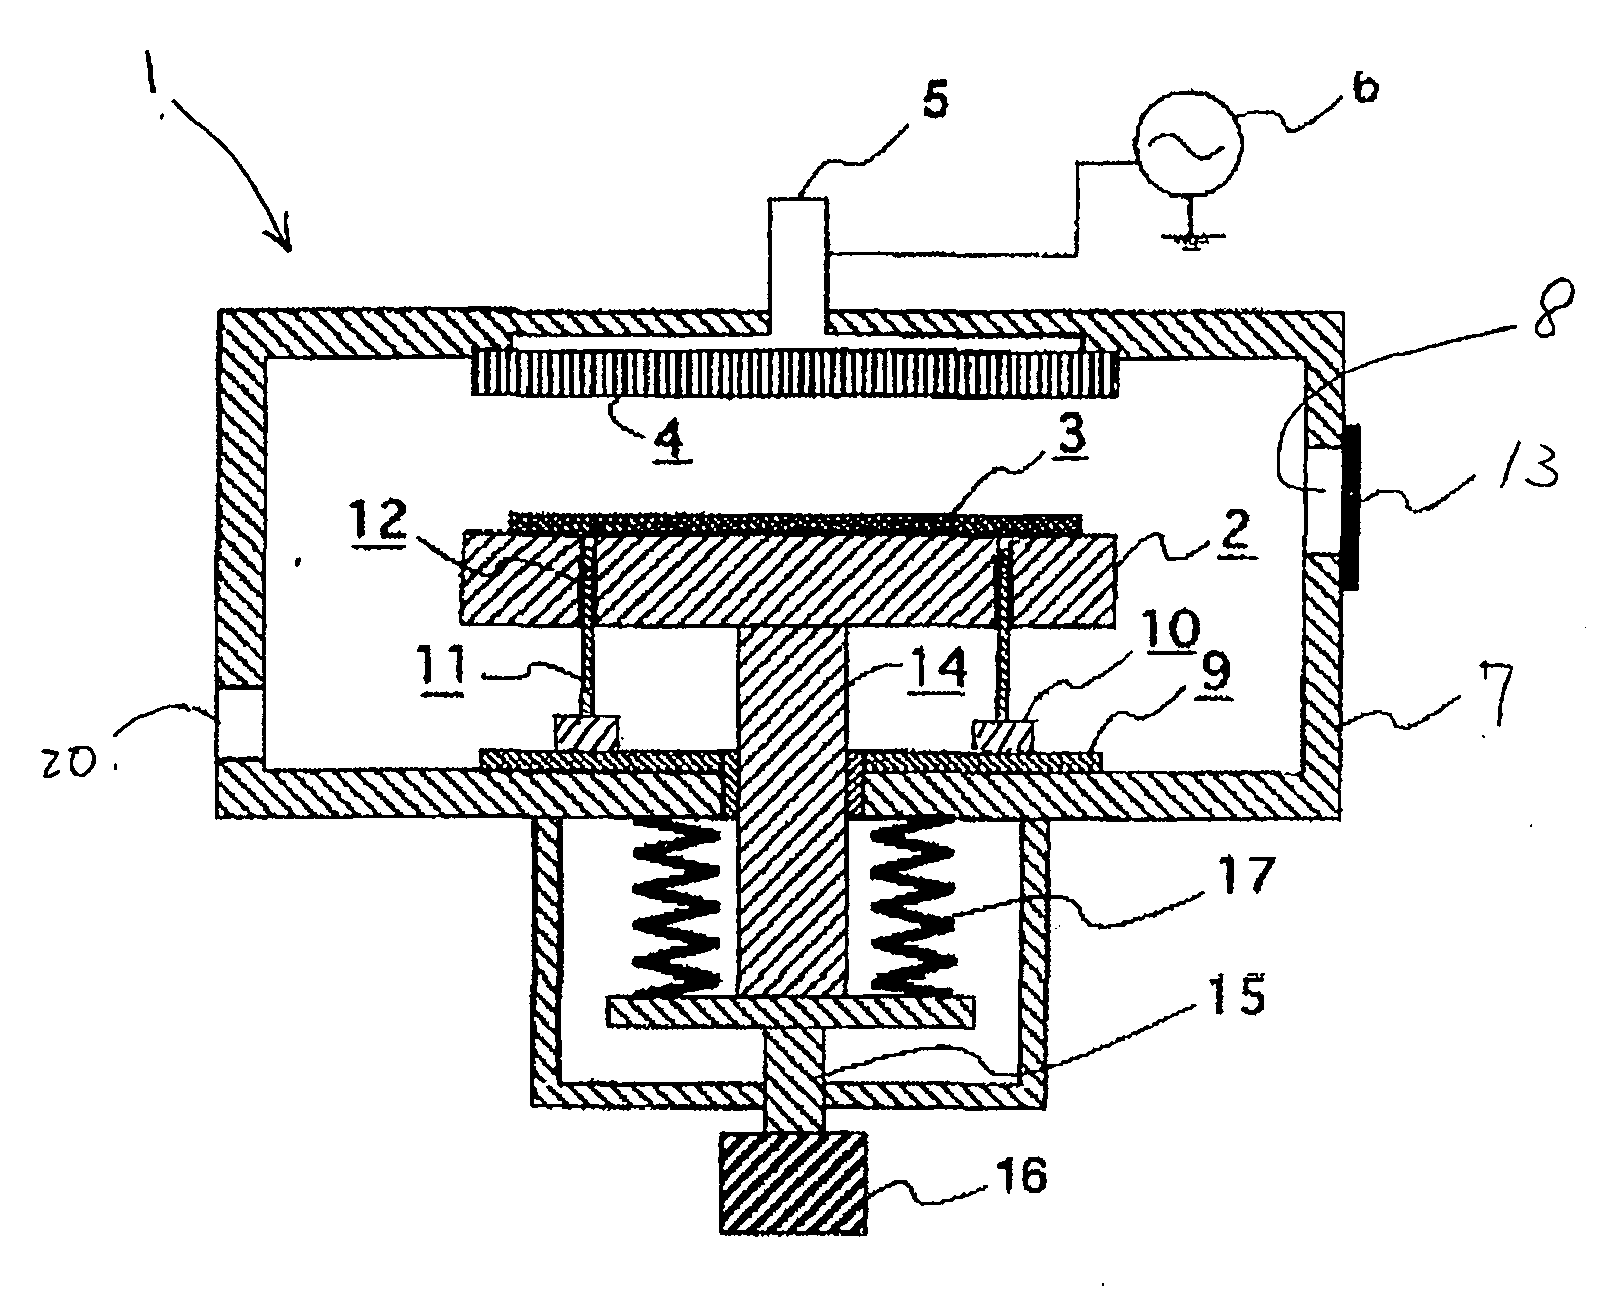 Semiconductor processing apparatus with lift pin structure